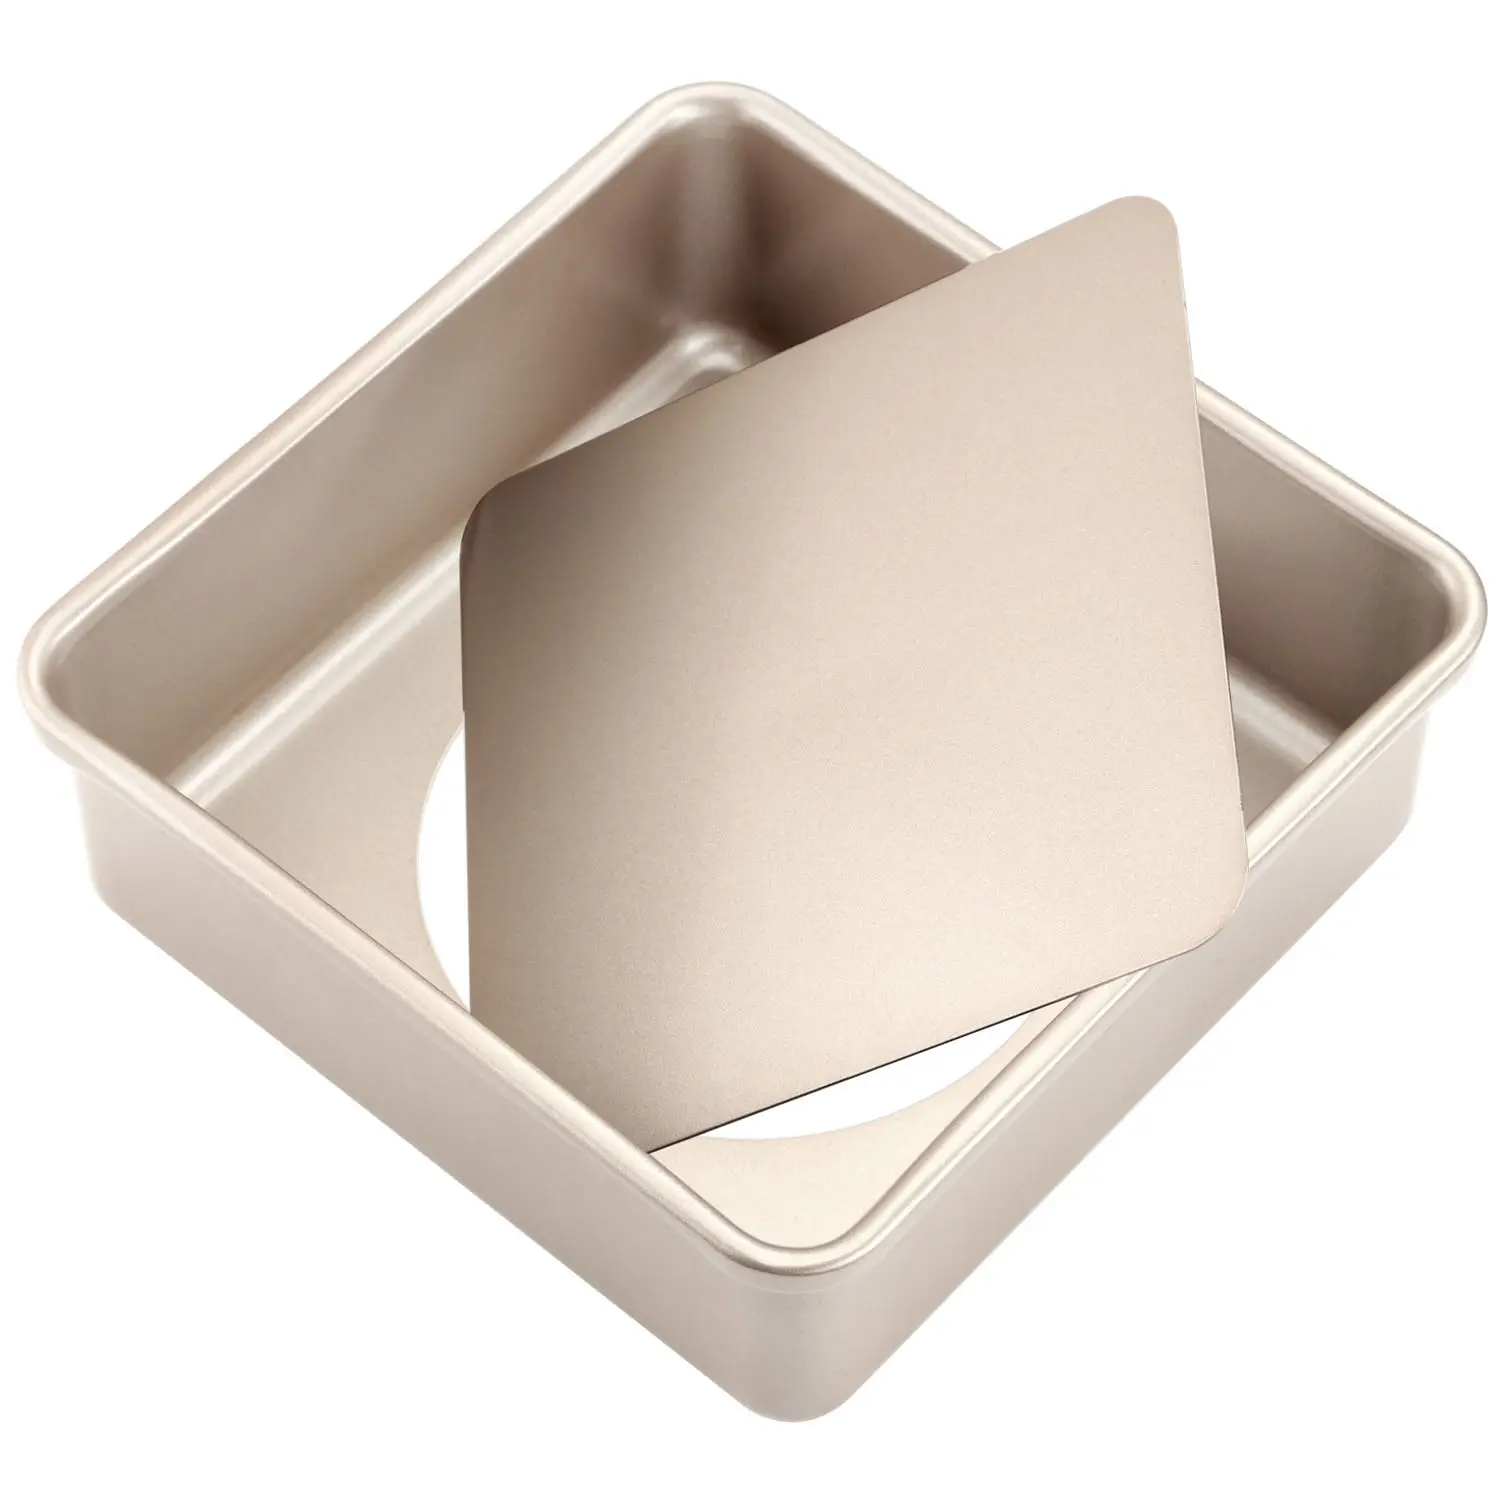 Best Selling 8 Inch Heat-resistant High Quality Square Live Bottom Baking Mould